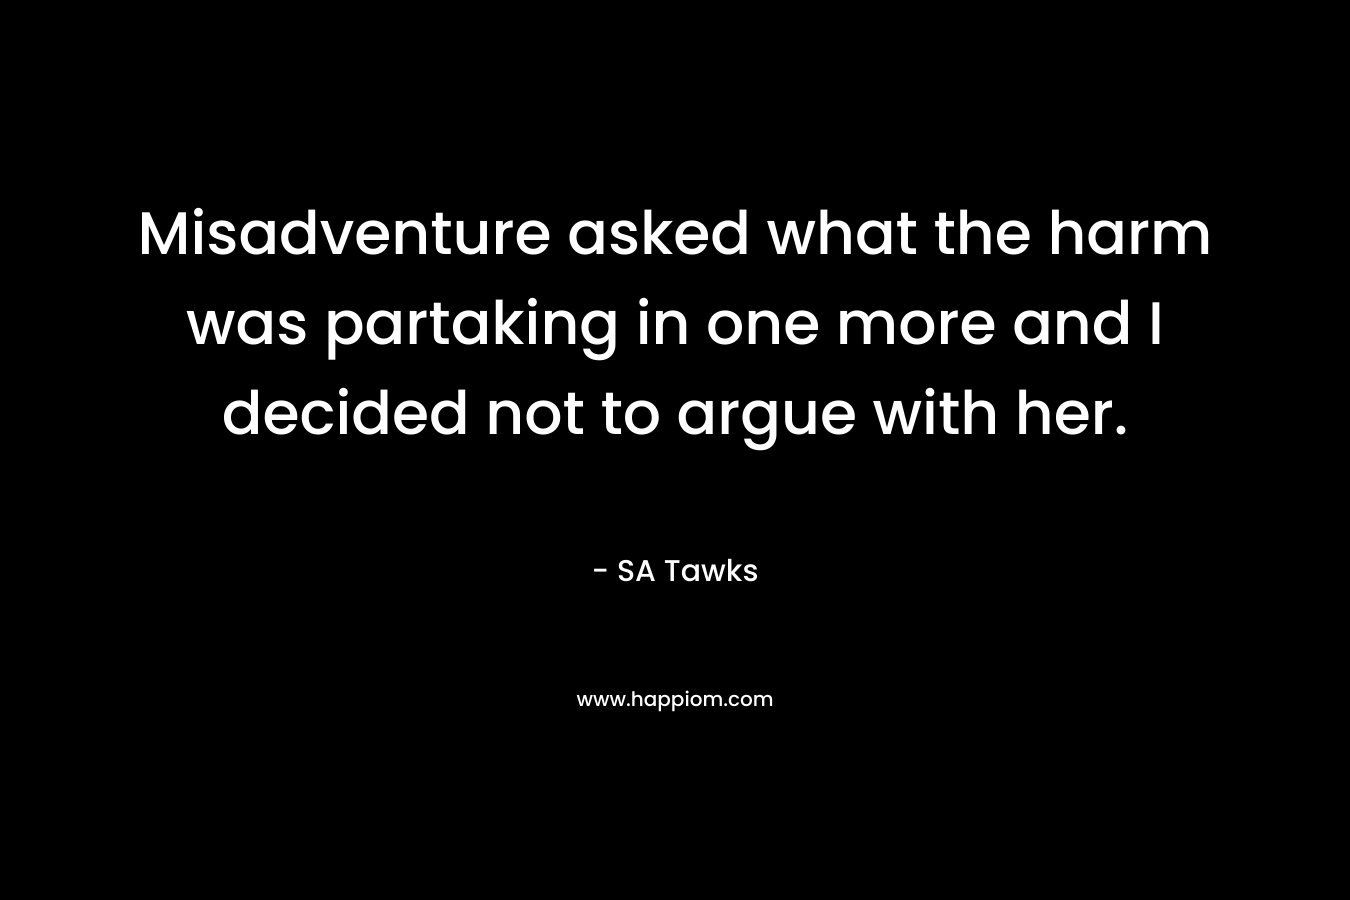 Misadventure asked what the harm was partaking in one more and I decided not to argue with her. – SA Tawks